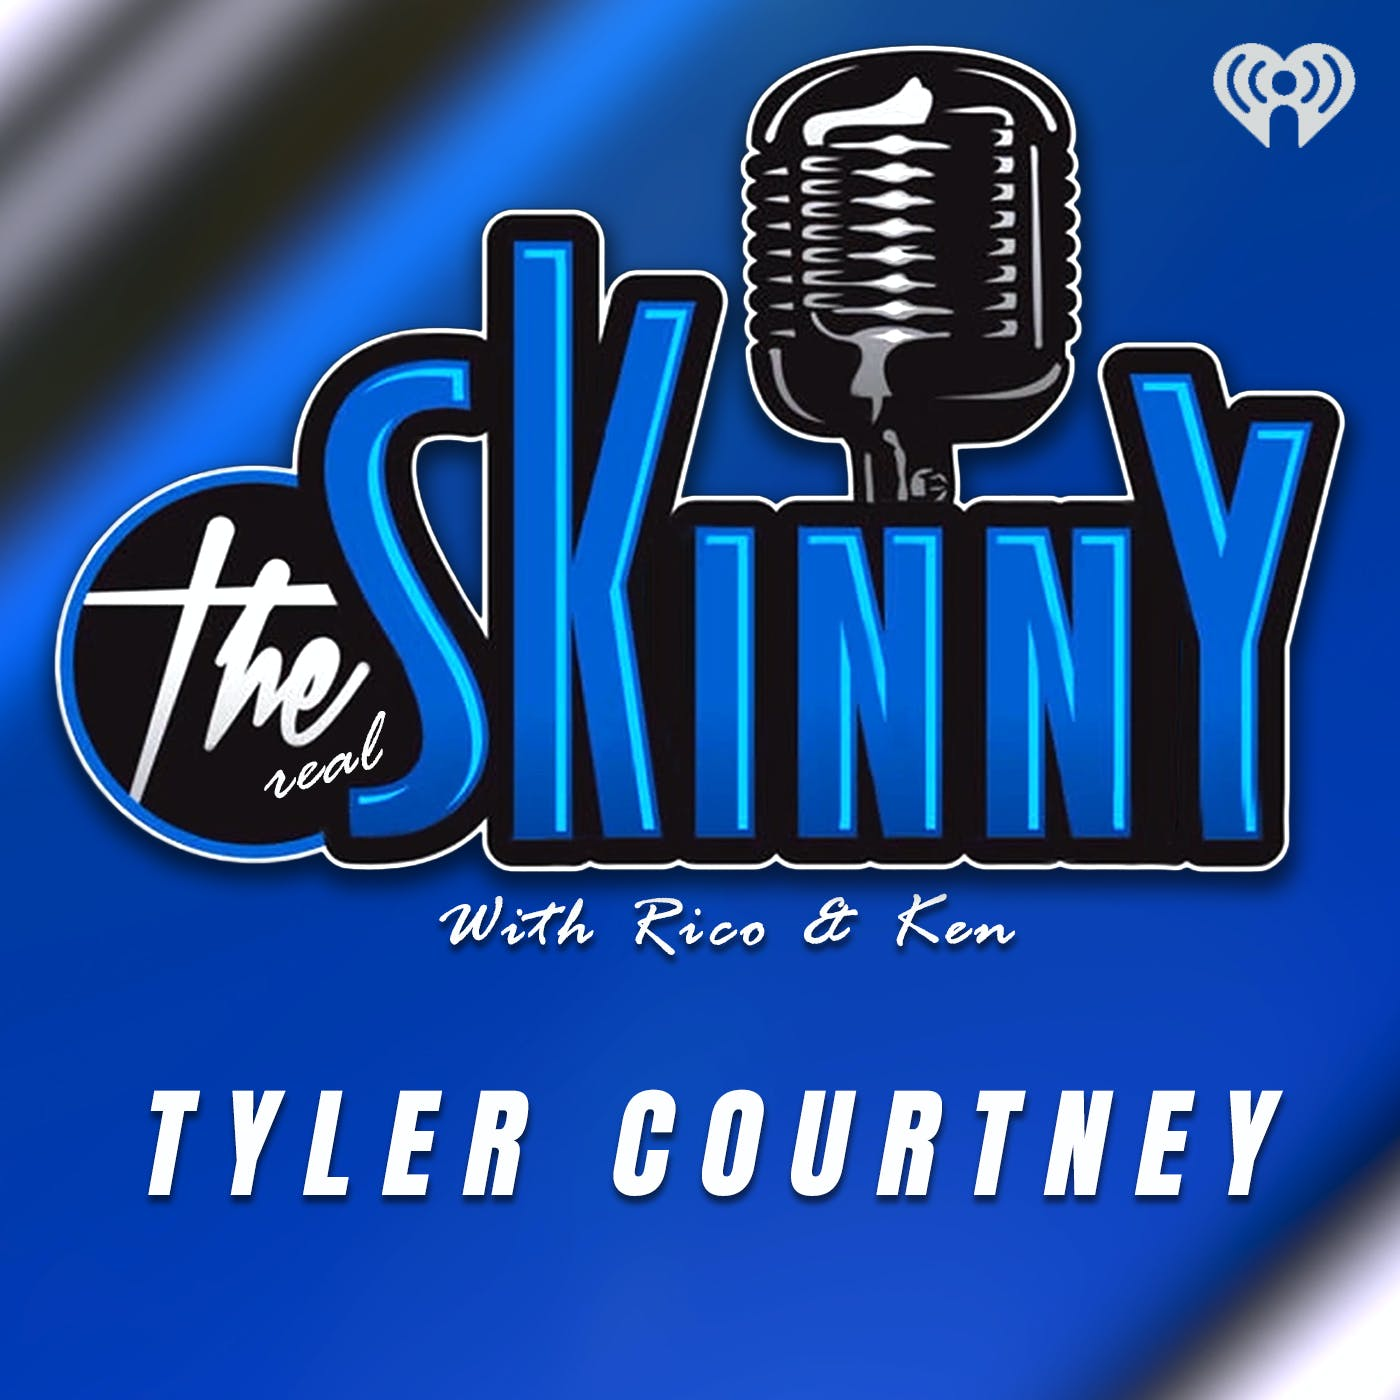 Tyler Courtney appears on The Skinny with Rico and Ken